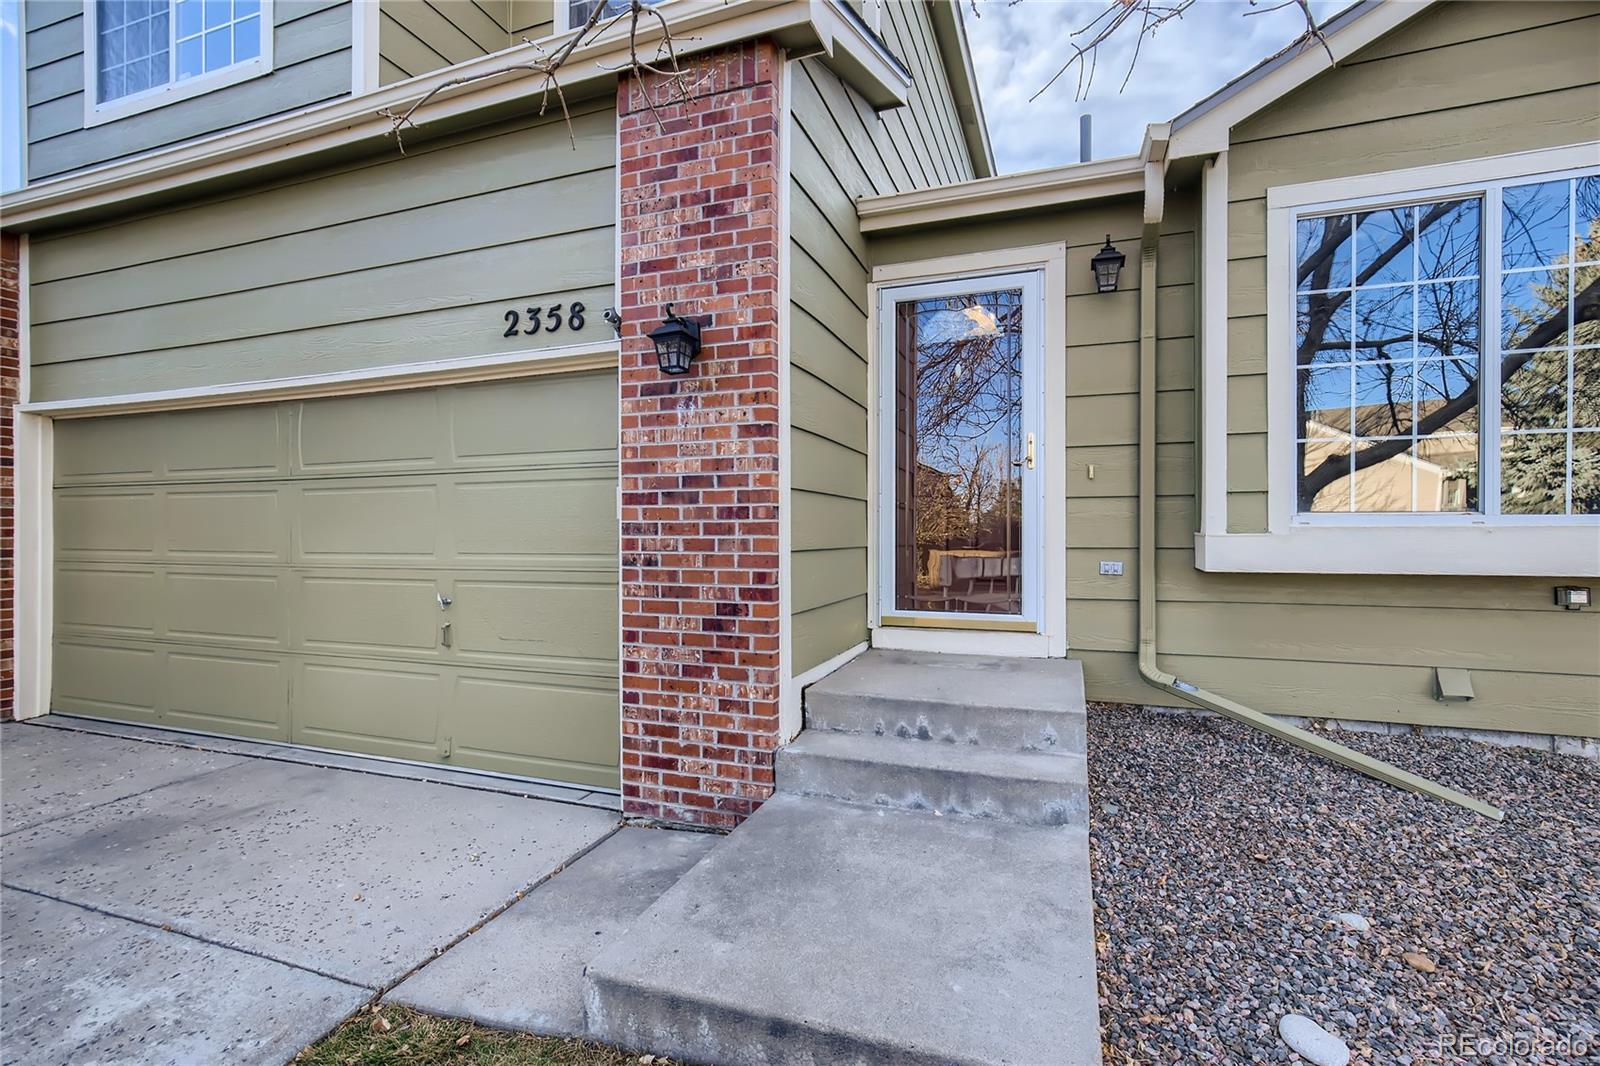 2358 Gold Dust, Highlands Ranch, CO